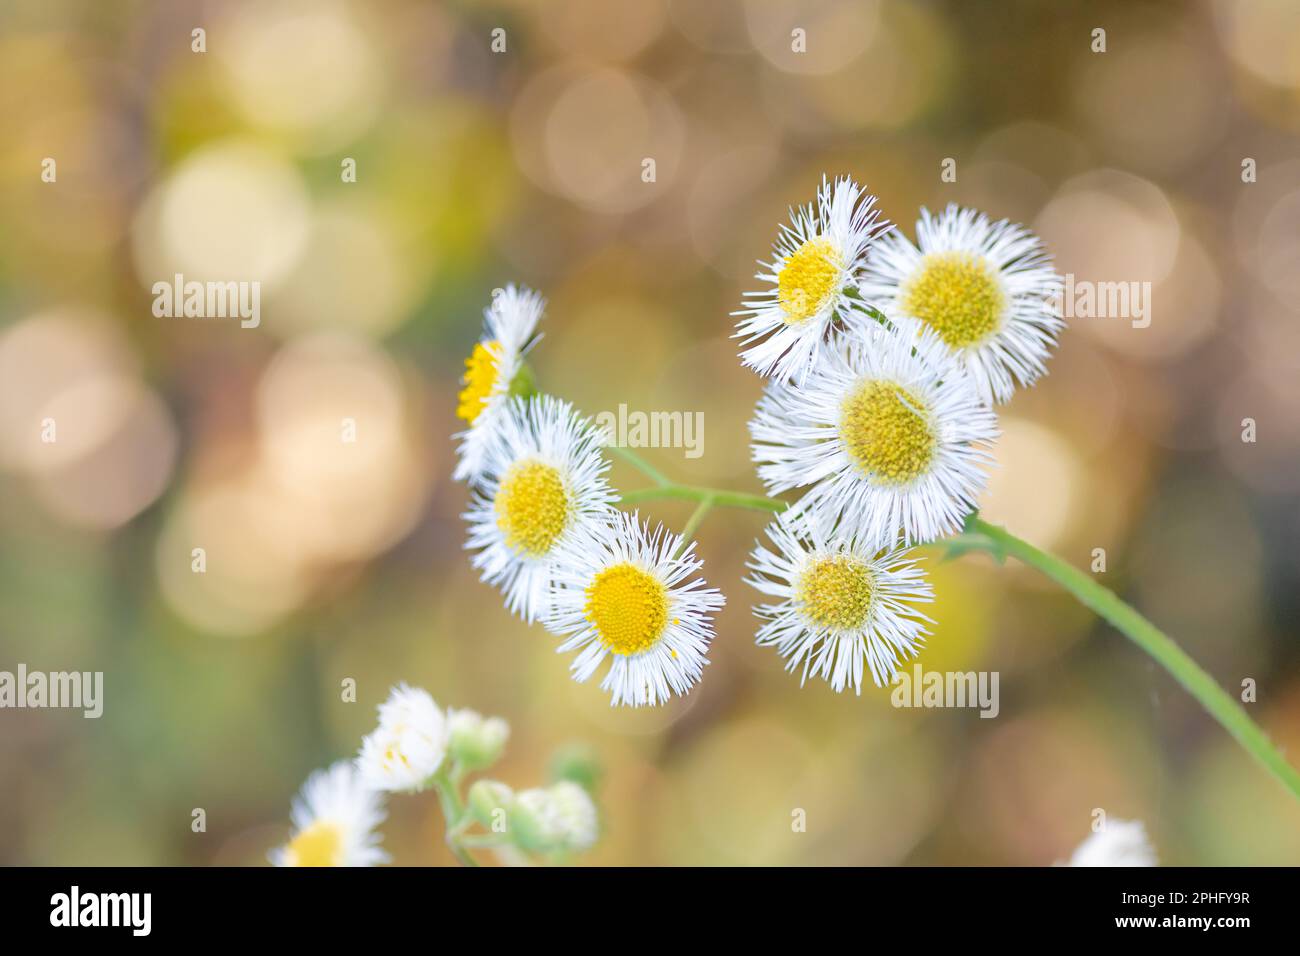 Common eastern fleabane flowers in the foreground and a colorful bokeh background. Stock Photo